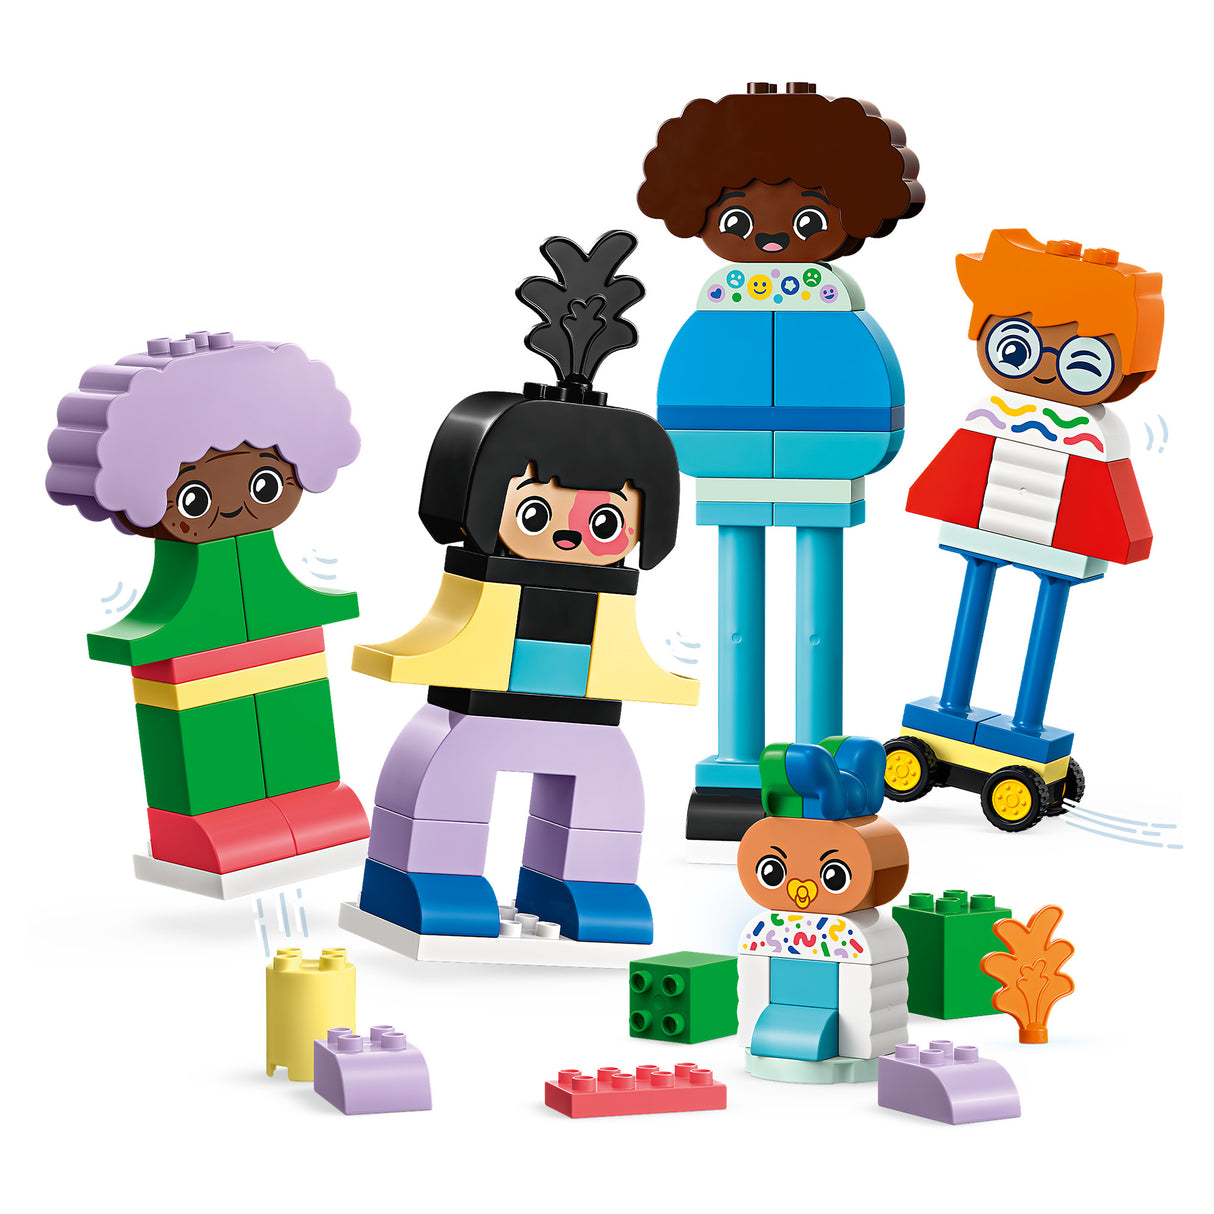 LEGO Duplo Buildable People with Big Emotions 10423, (71-pieces)